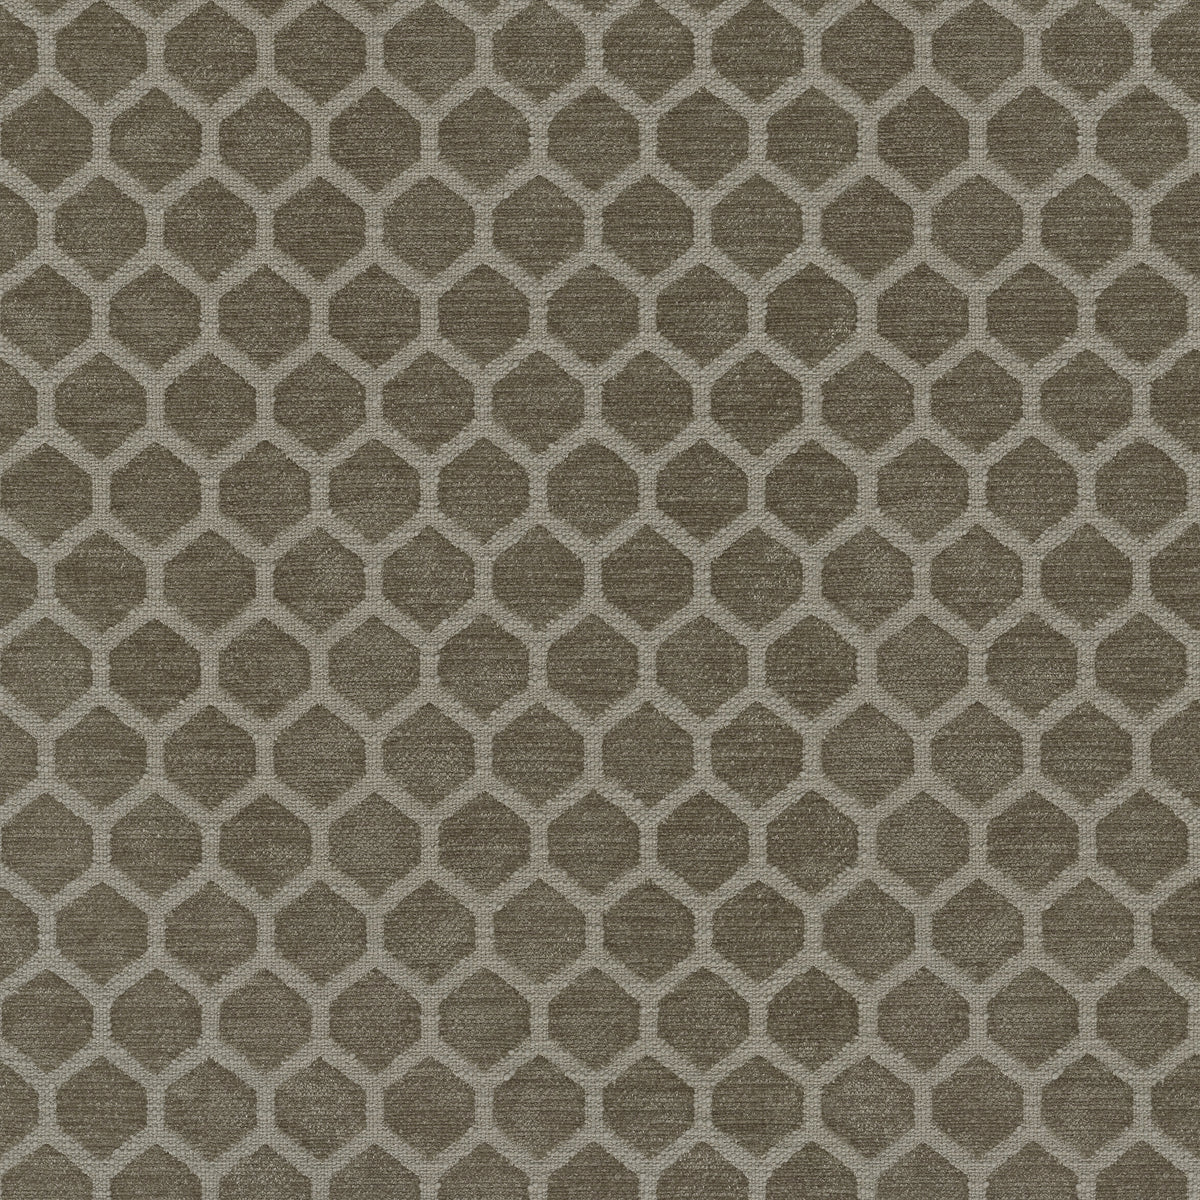 P/K Lifestyles Performance Honeycomb - Fossil 411375 Fabric Swatch